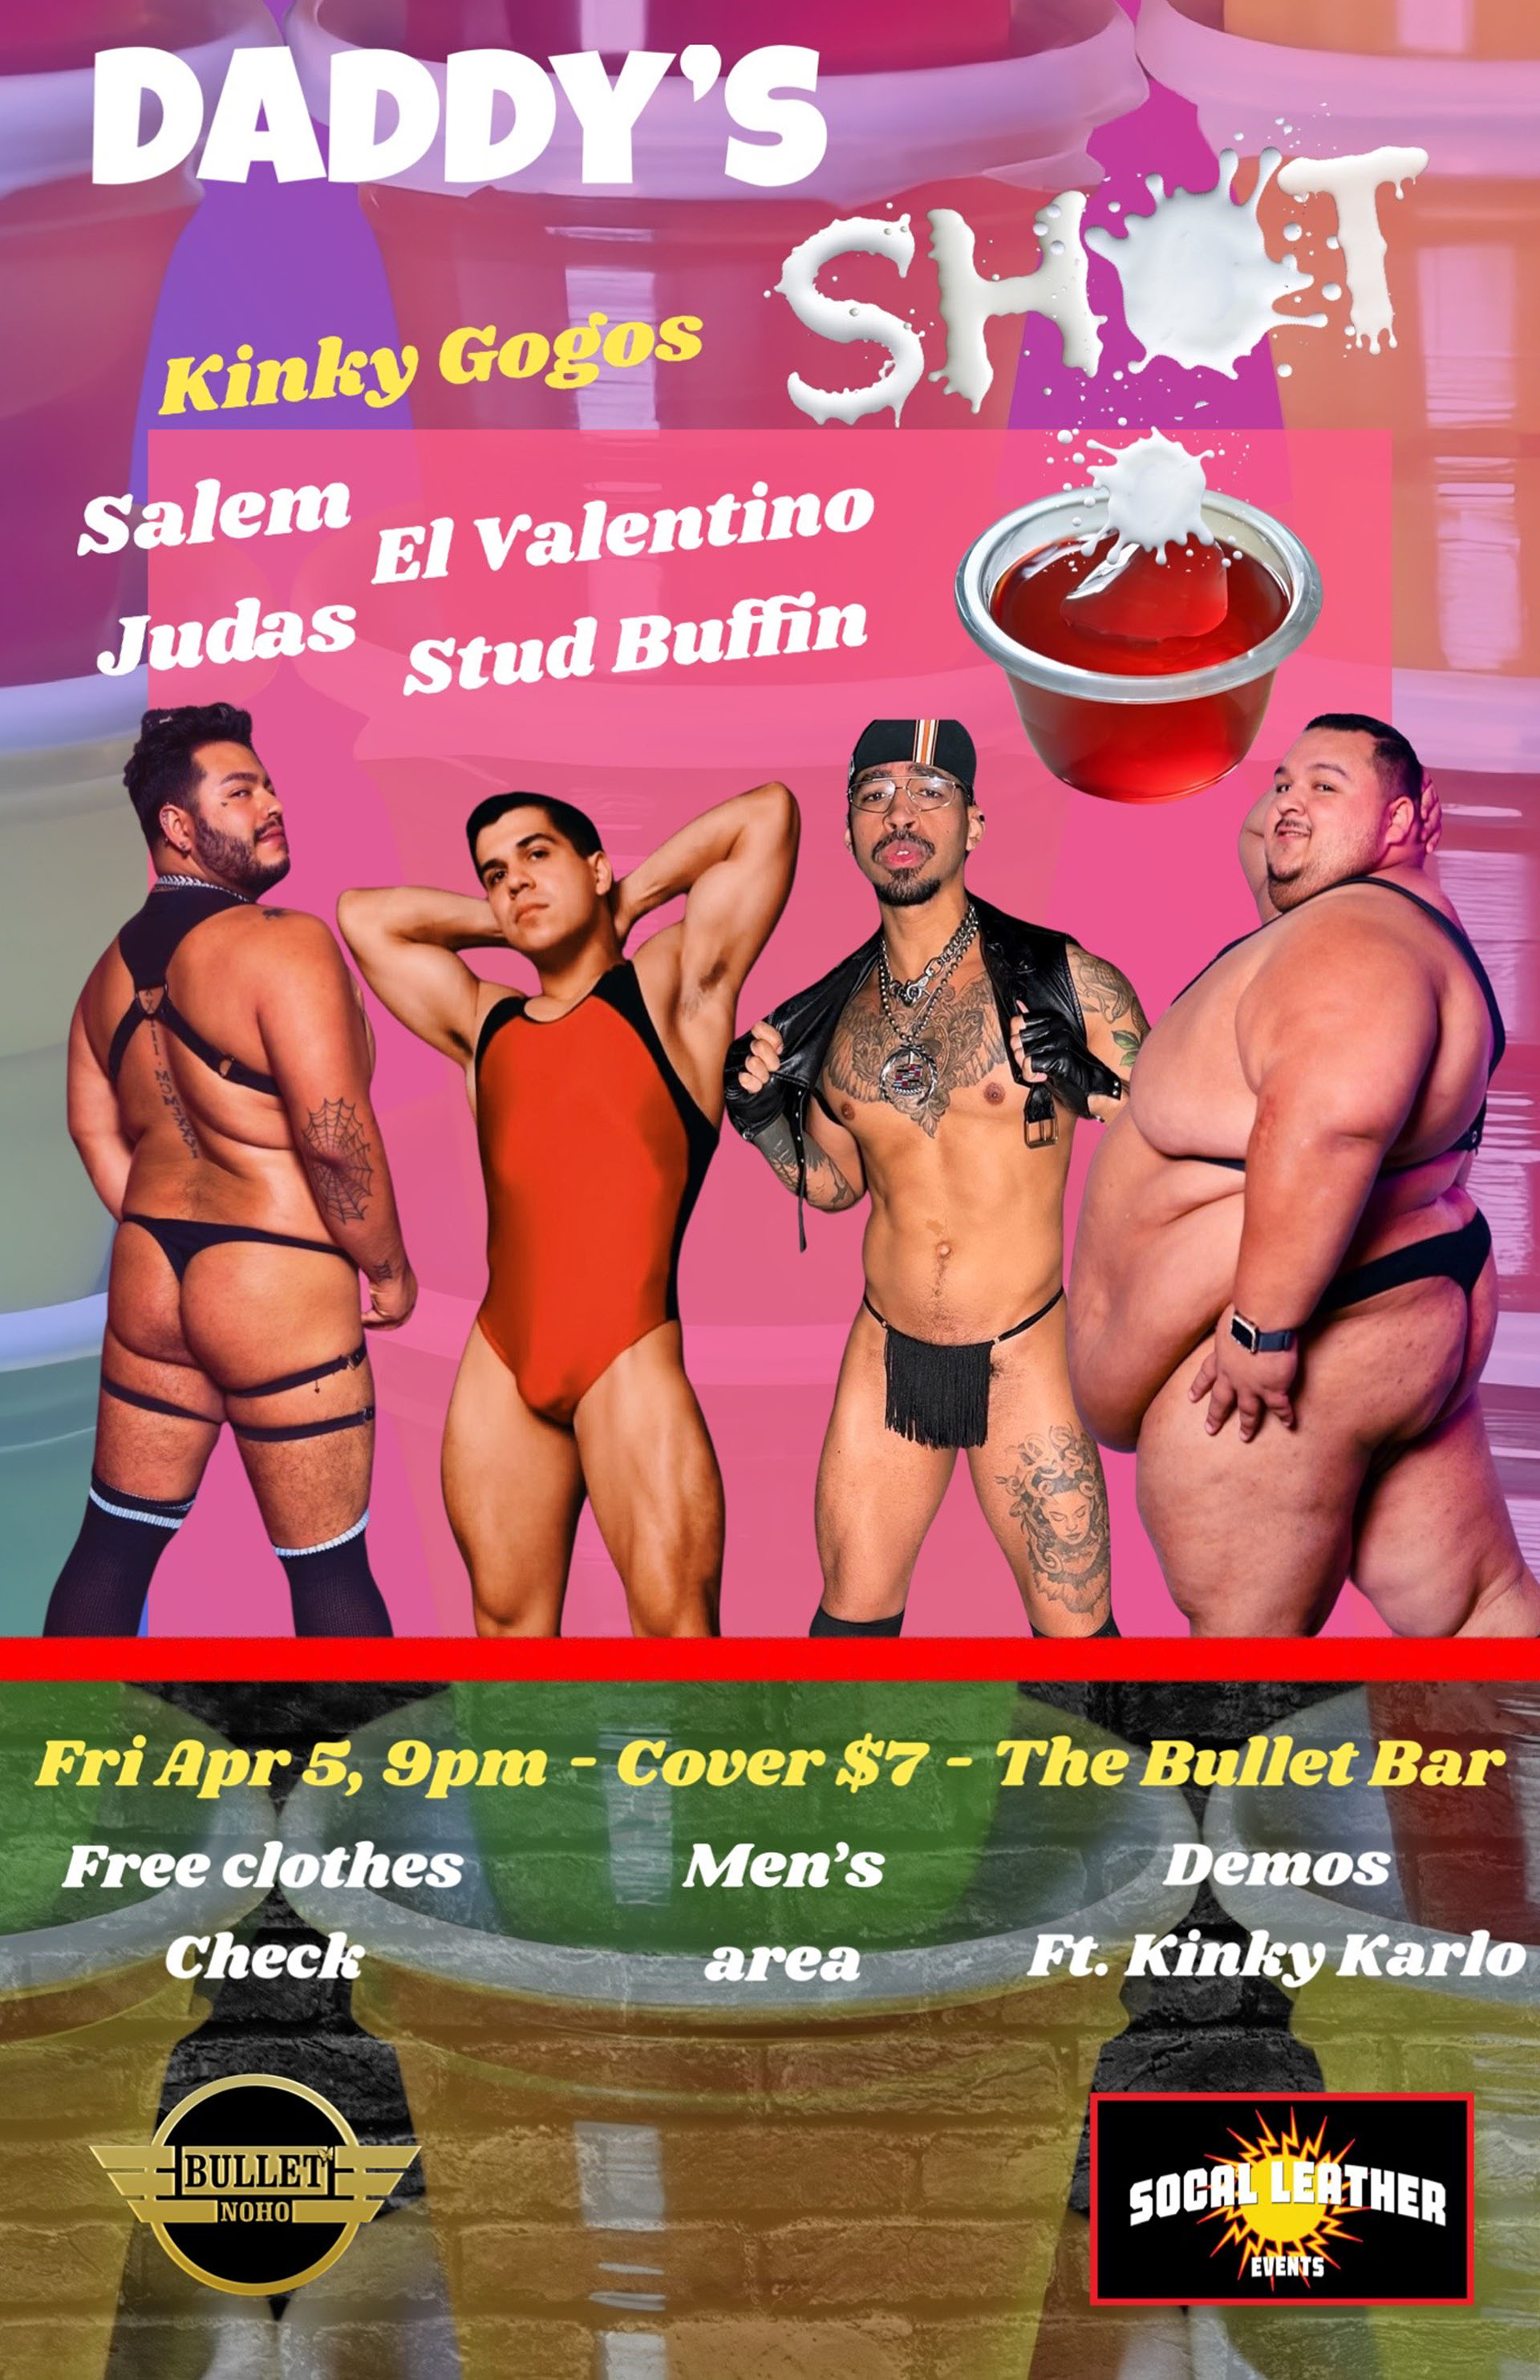 THE BULLET BAR and SOCAL LEATHER EVENTS Present DADDY'S SHOT: Friday, 04/05/24 at 9:00 PM. Free Clothes Check. KINKY DEMOS! Men's Area! $7 cover.